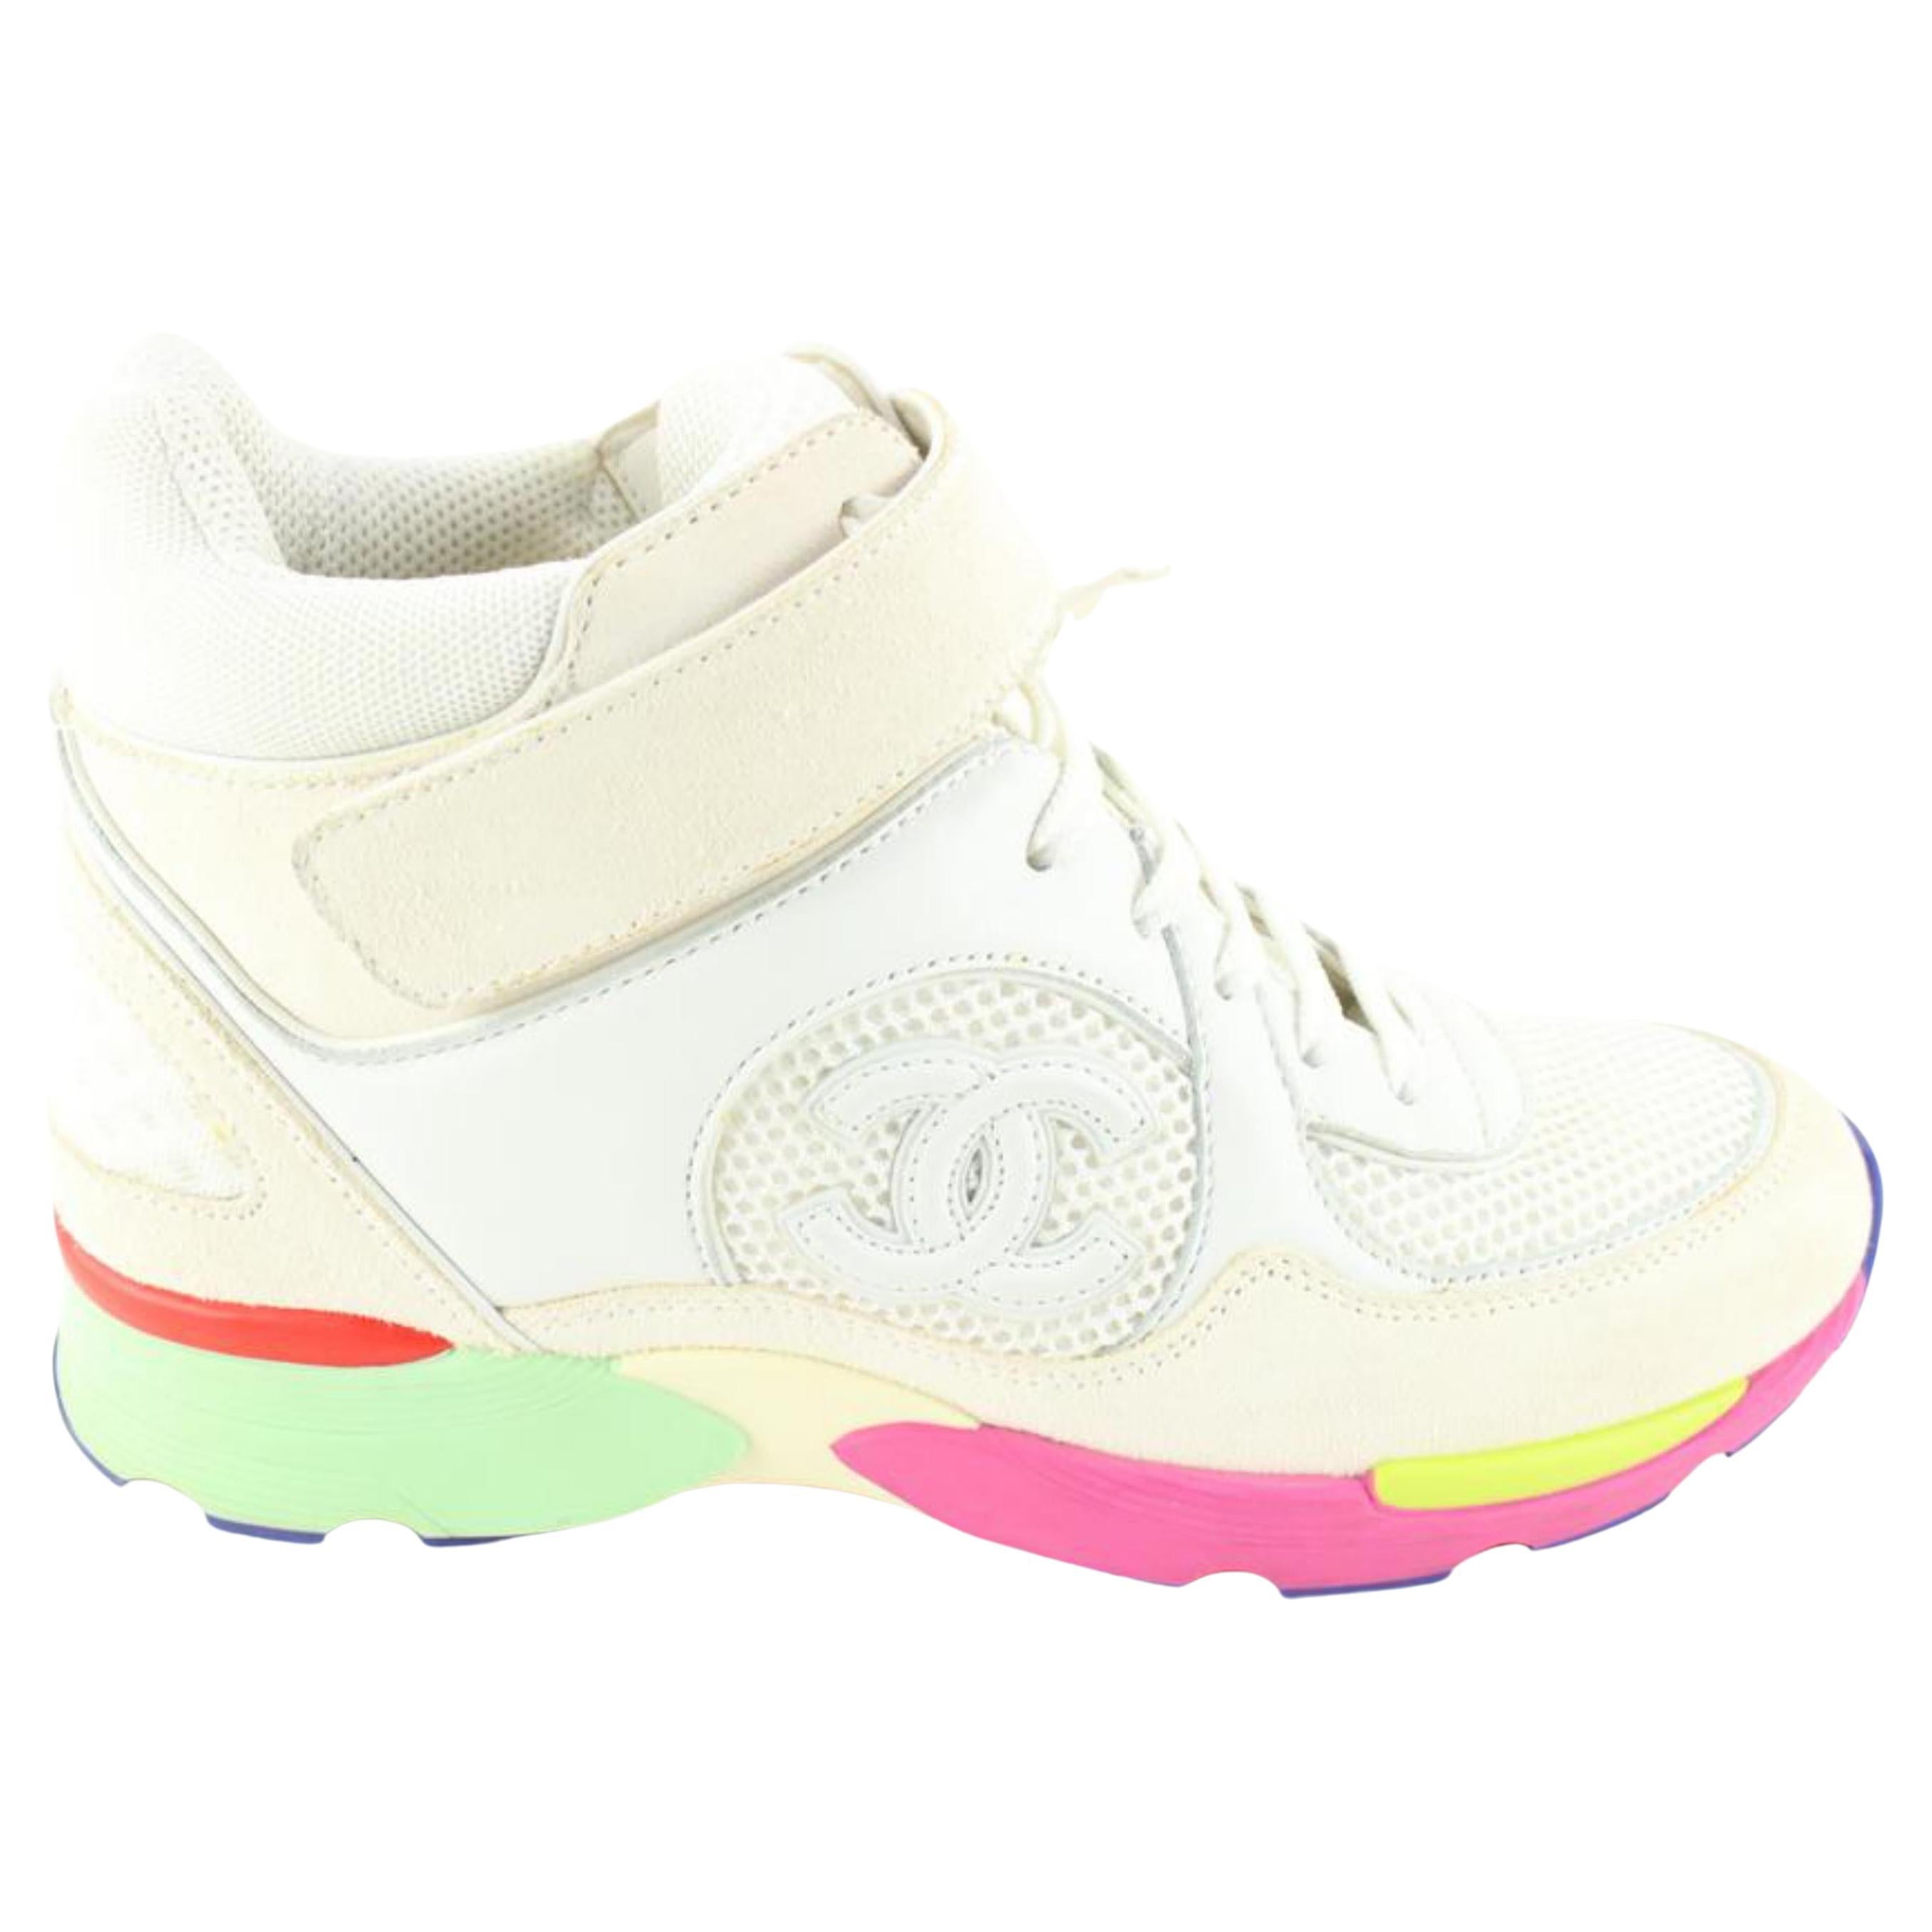 Chanel G26584 Women's 37 Multicolor High Top Trainer Sneakers 34cc721s